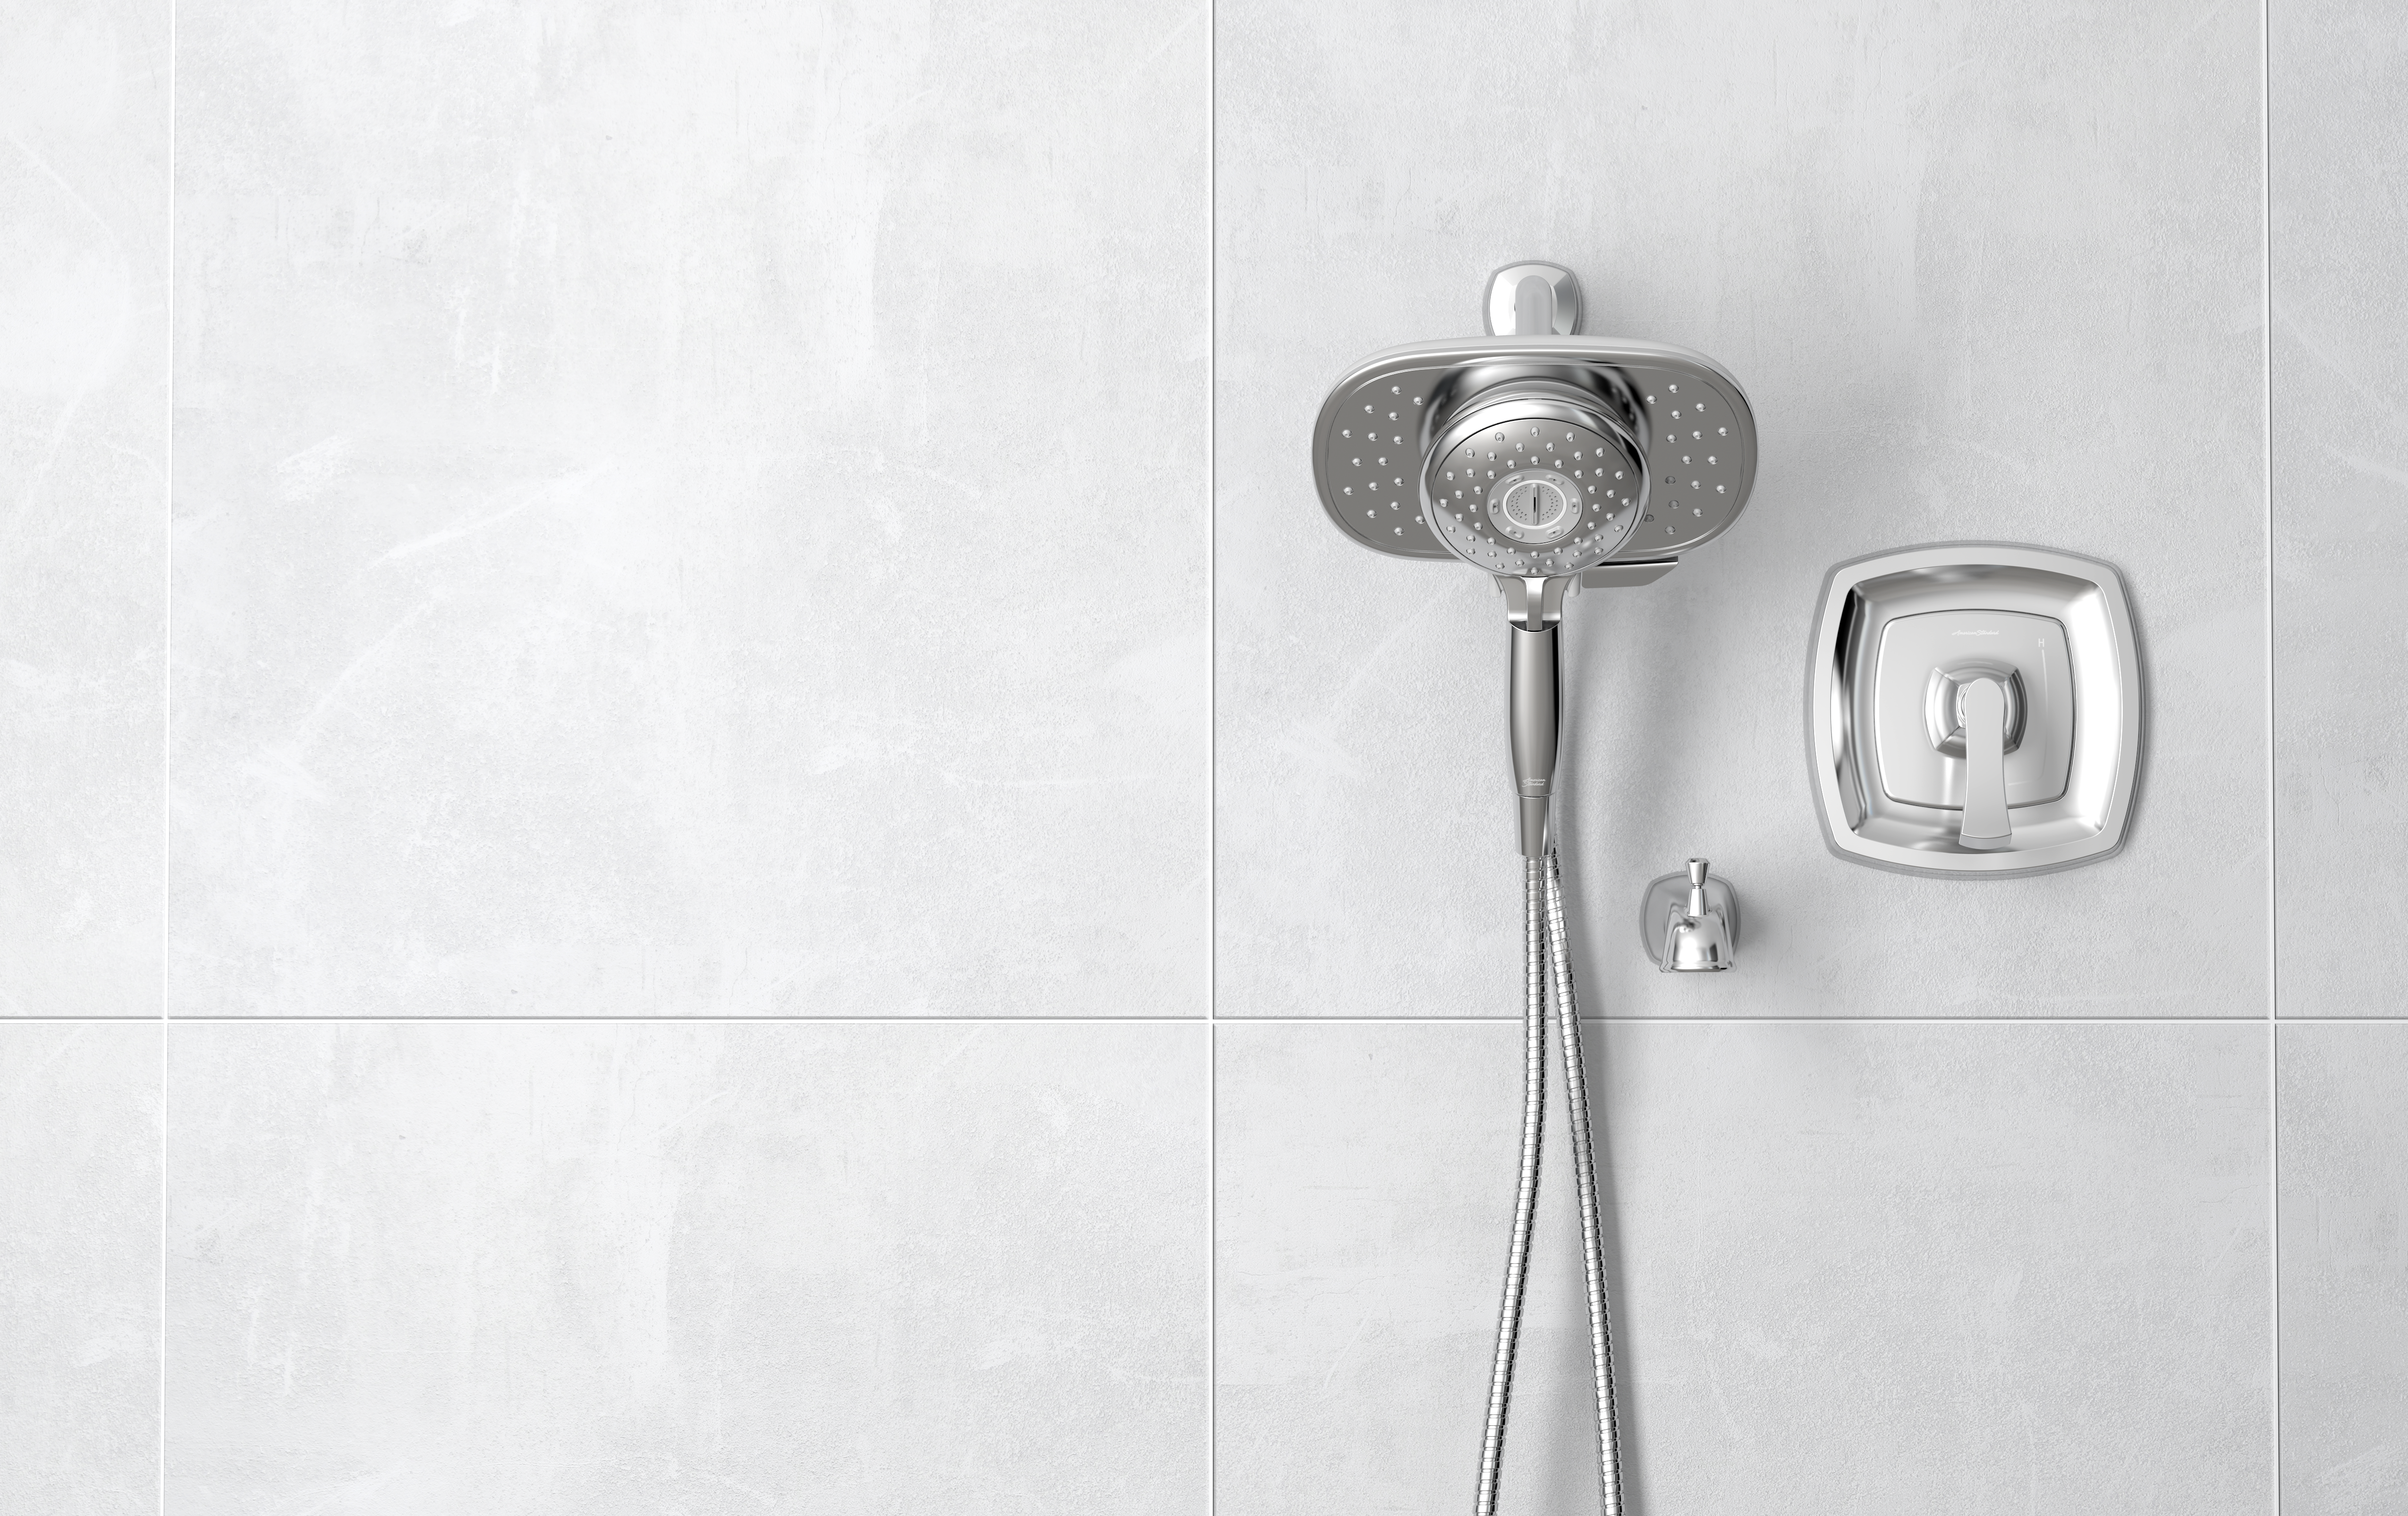 Kaleta 2.5 GPM Tub and Shower Trim Kit with Spectra Duo Showerhead and Ceramic Disc Valve Cartridge with Lever Handle